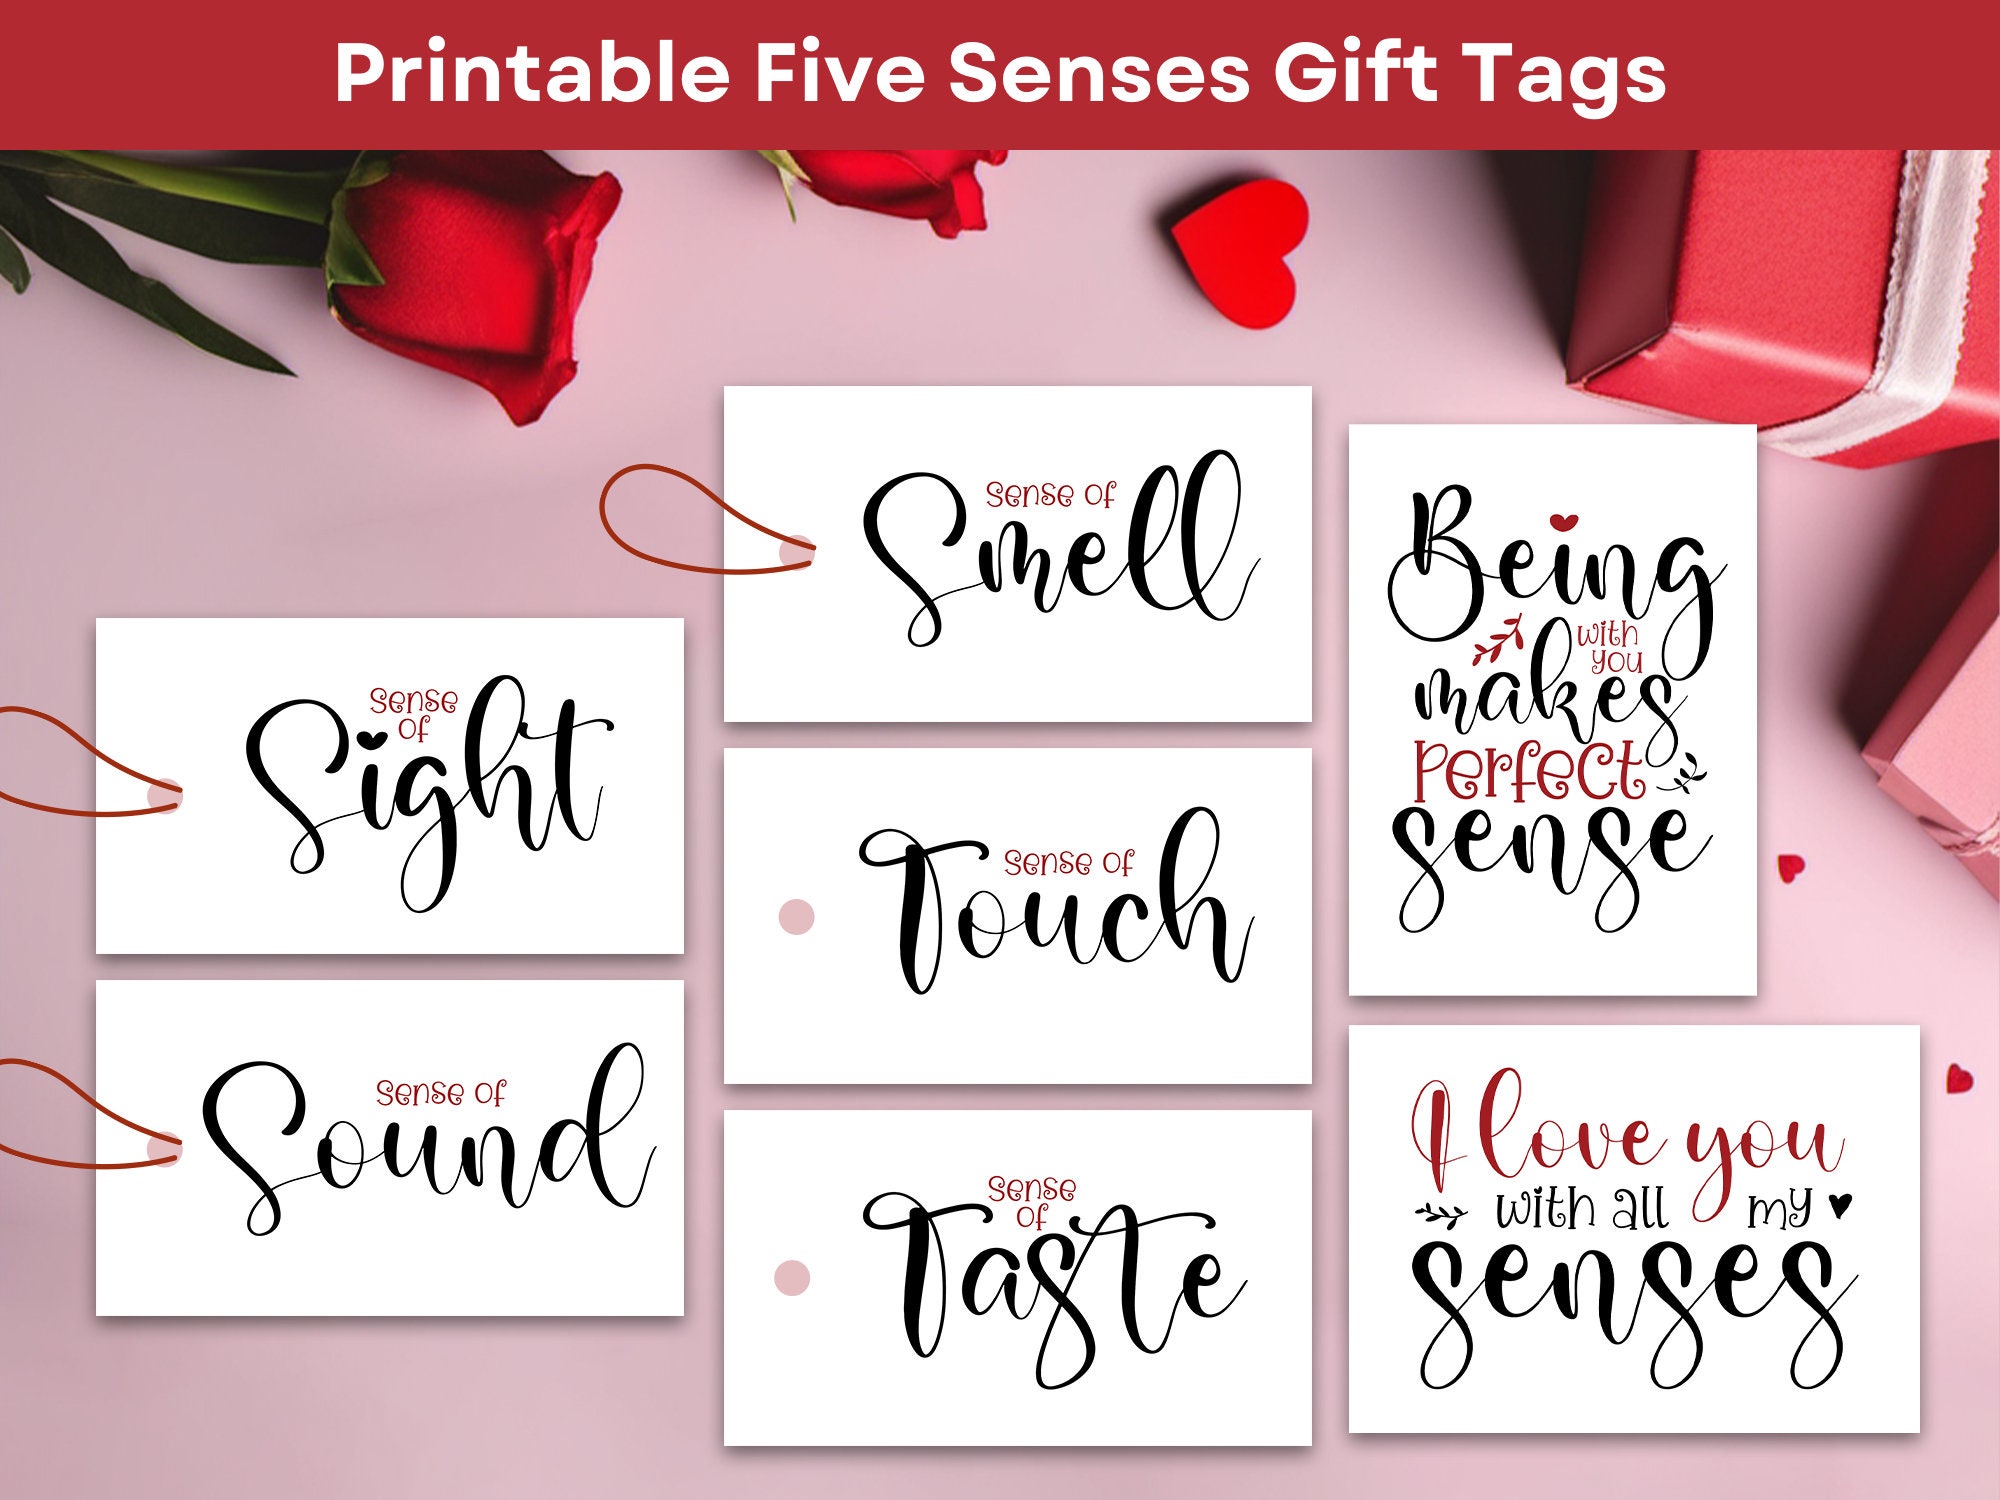 5 Senses Gift Tags One Year Anniversary Gifts for Boyfriend 